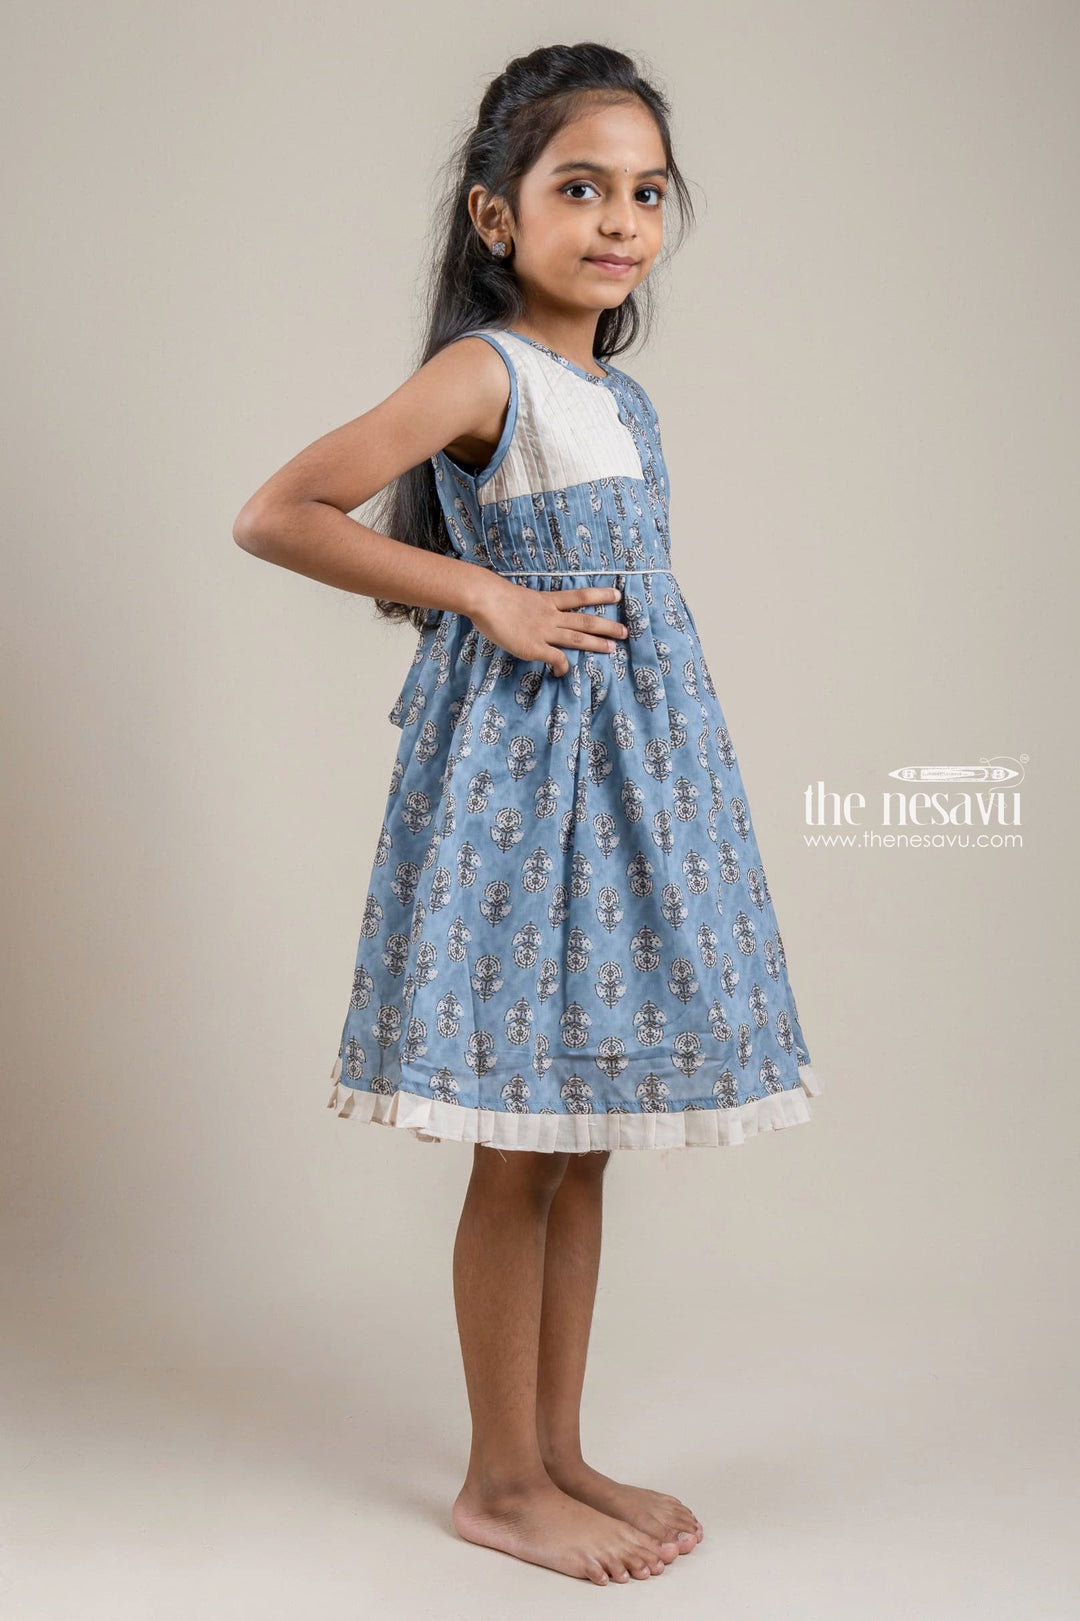 The Nesavu Girls Fancy Frock Adorable Hand Block Printed Sleeveless Blue Cotton Frock with Embellished Potli Button for Girls Nesavu Hand Block Printed Cotton Frock | Latest Cotton Frock | The Nesavu